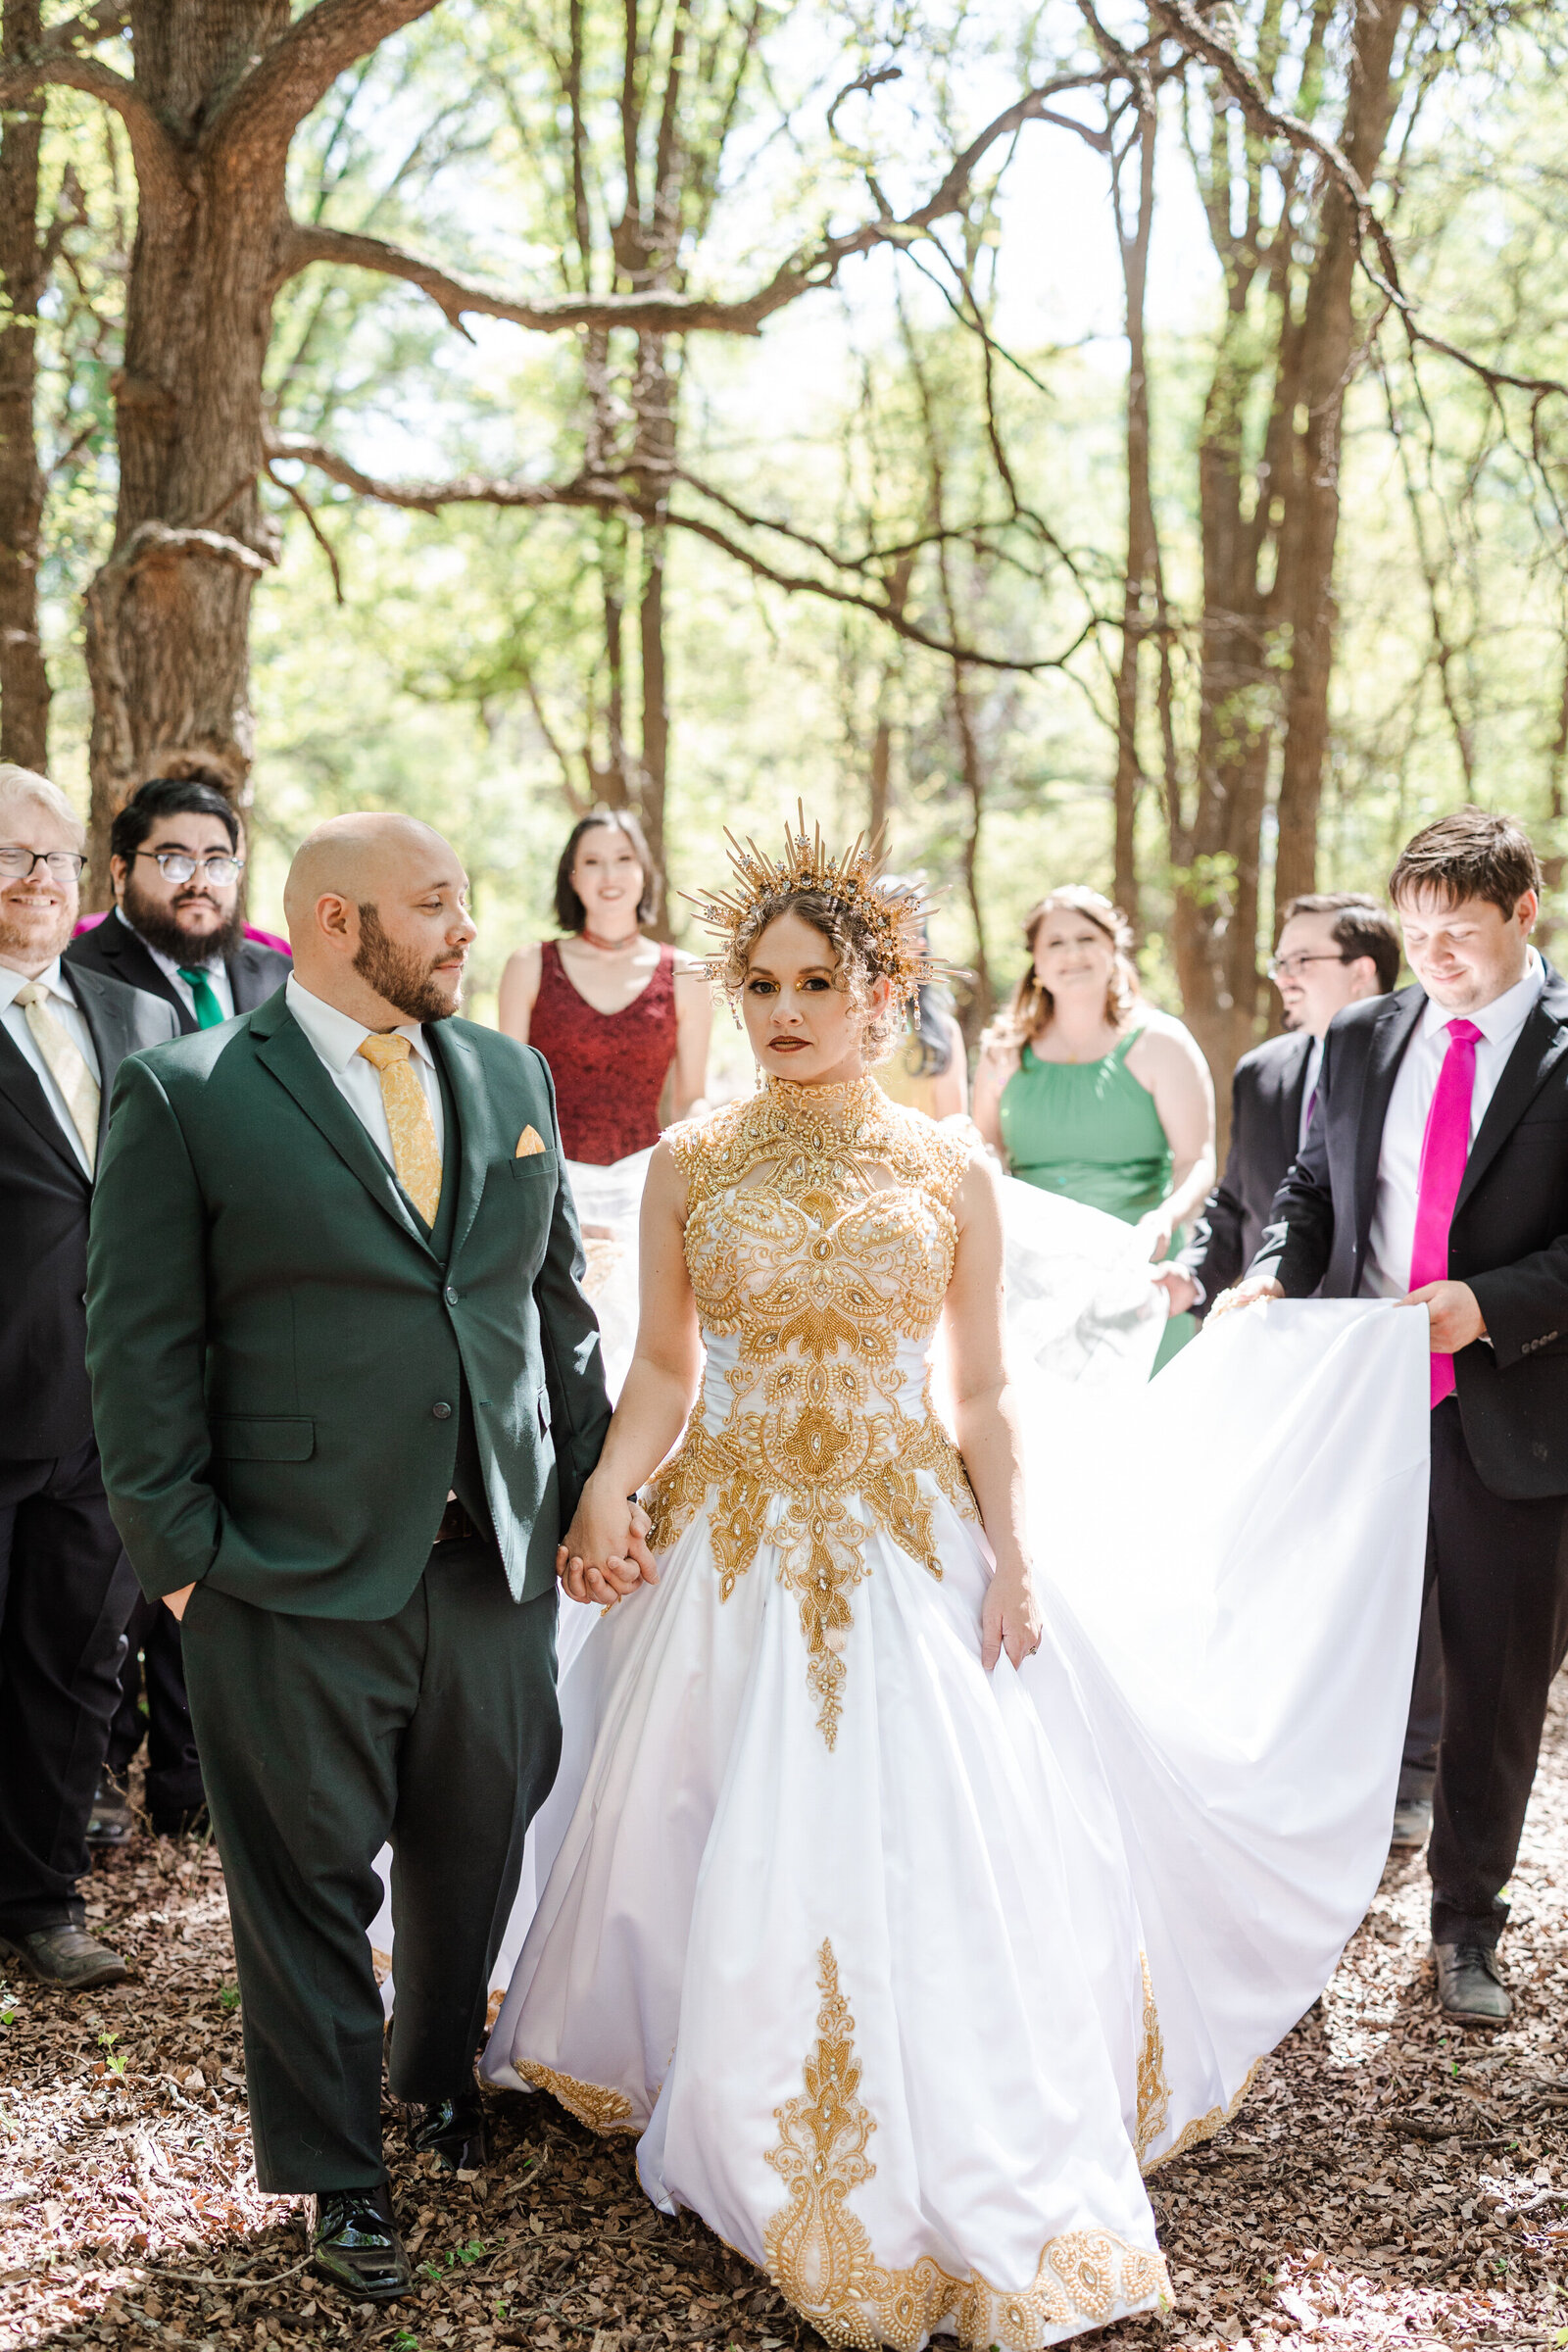 A bride in a gold crown and gold accented dress holds her groom's hand while her wedding party fans out her long dress train behind her. The groom is wearing a green suit and is looking at the bride. The wedding party all follow joyfully behind them in a wooded setting.